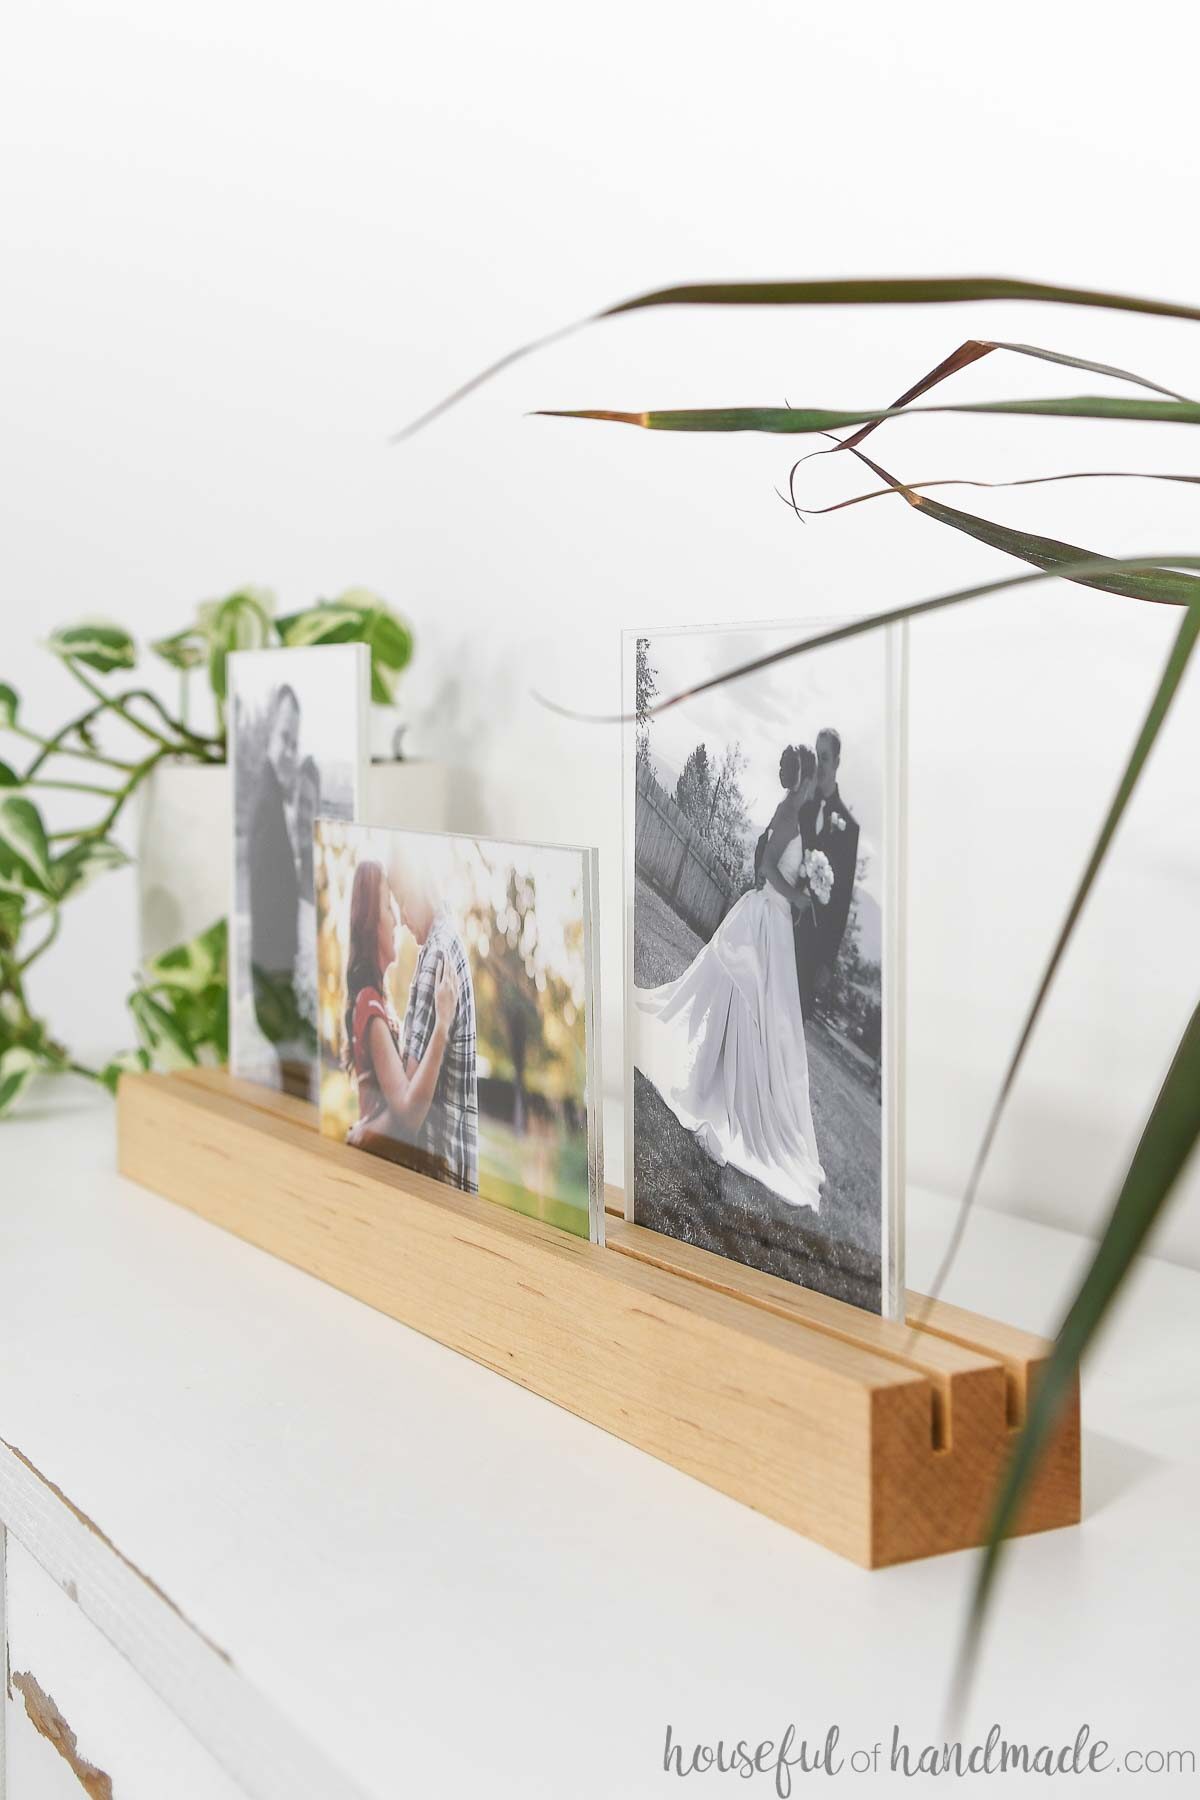 Artistic view of the picture frame holding 3 different photos in two rows. 